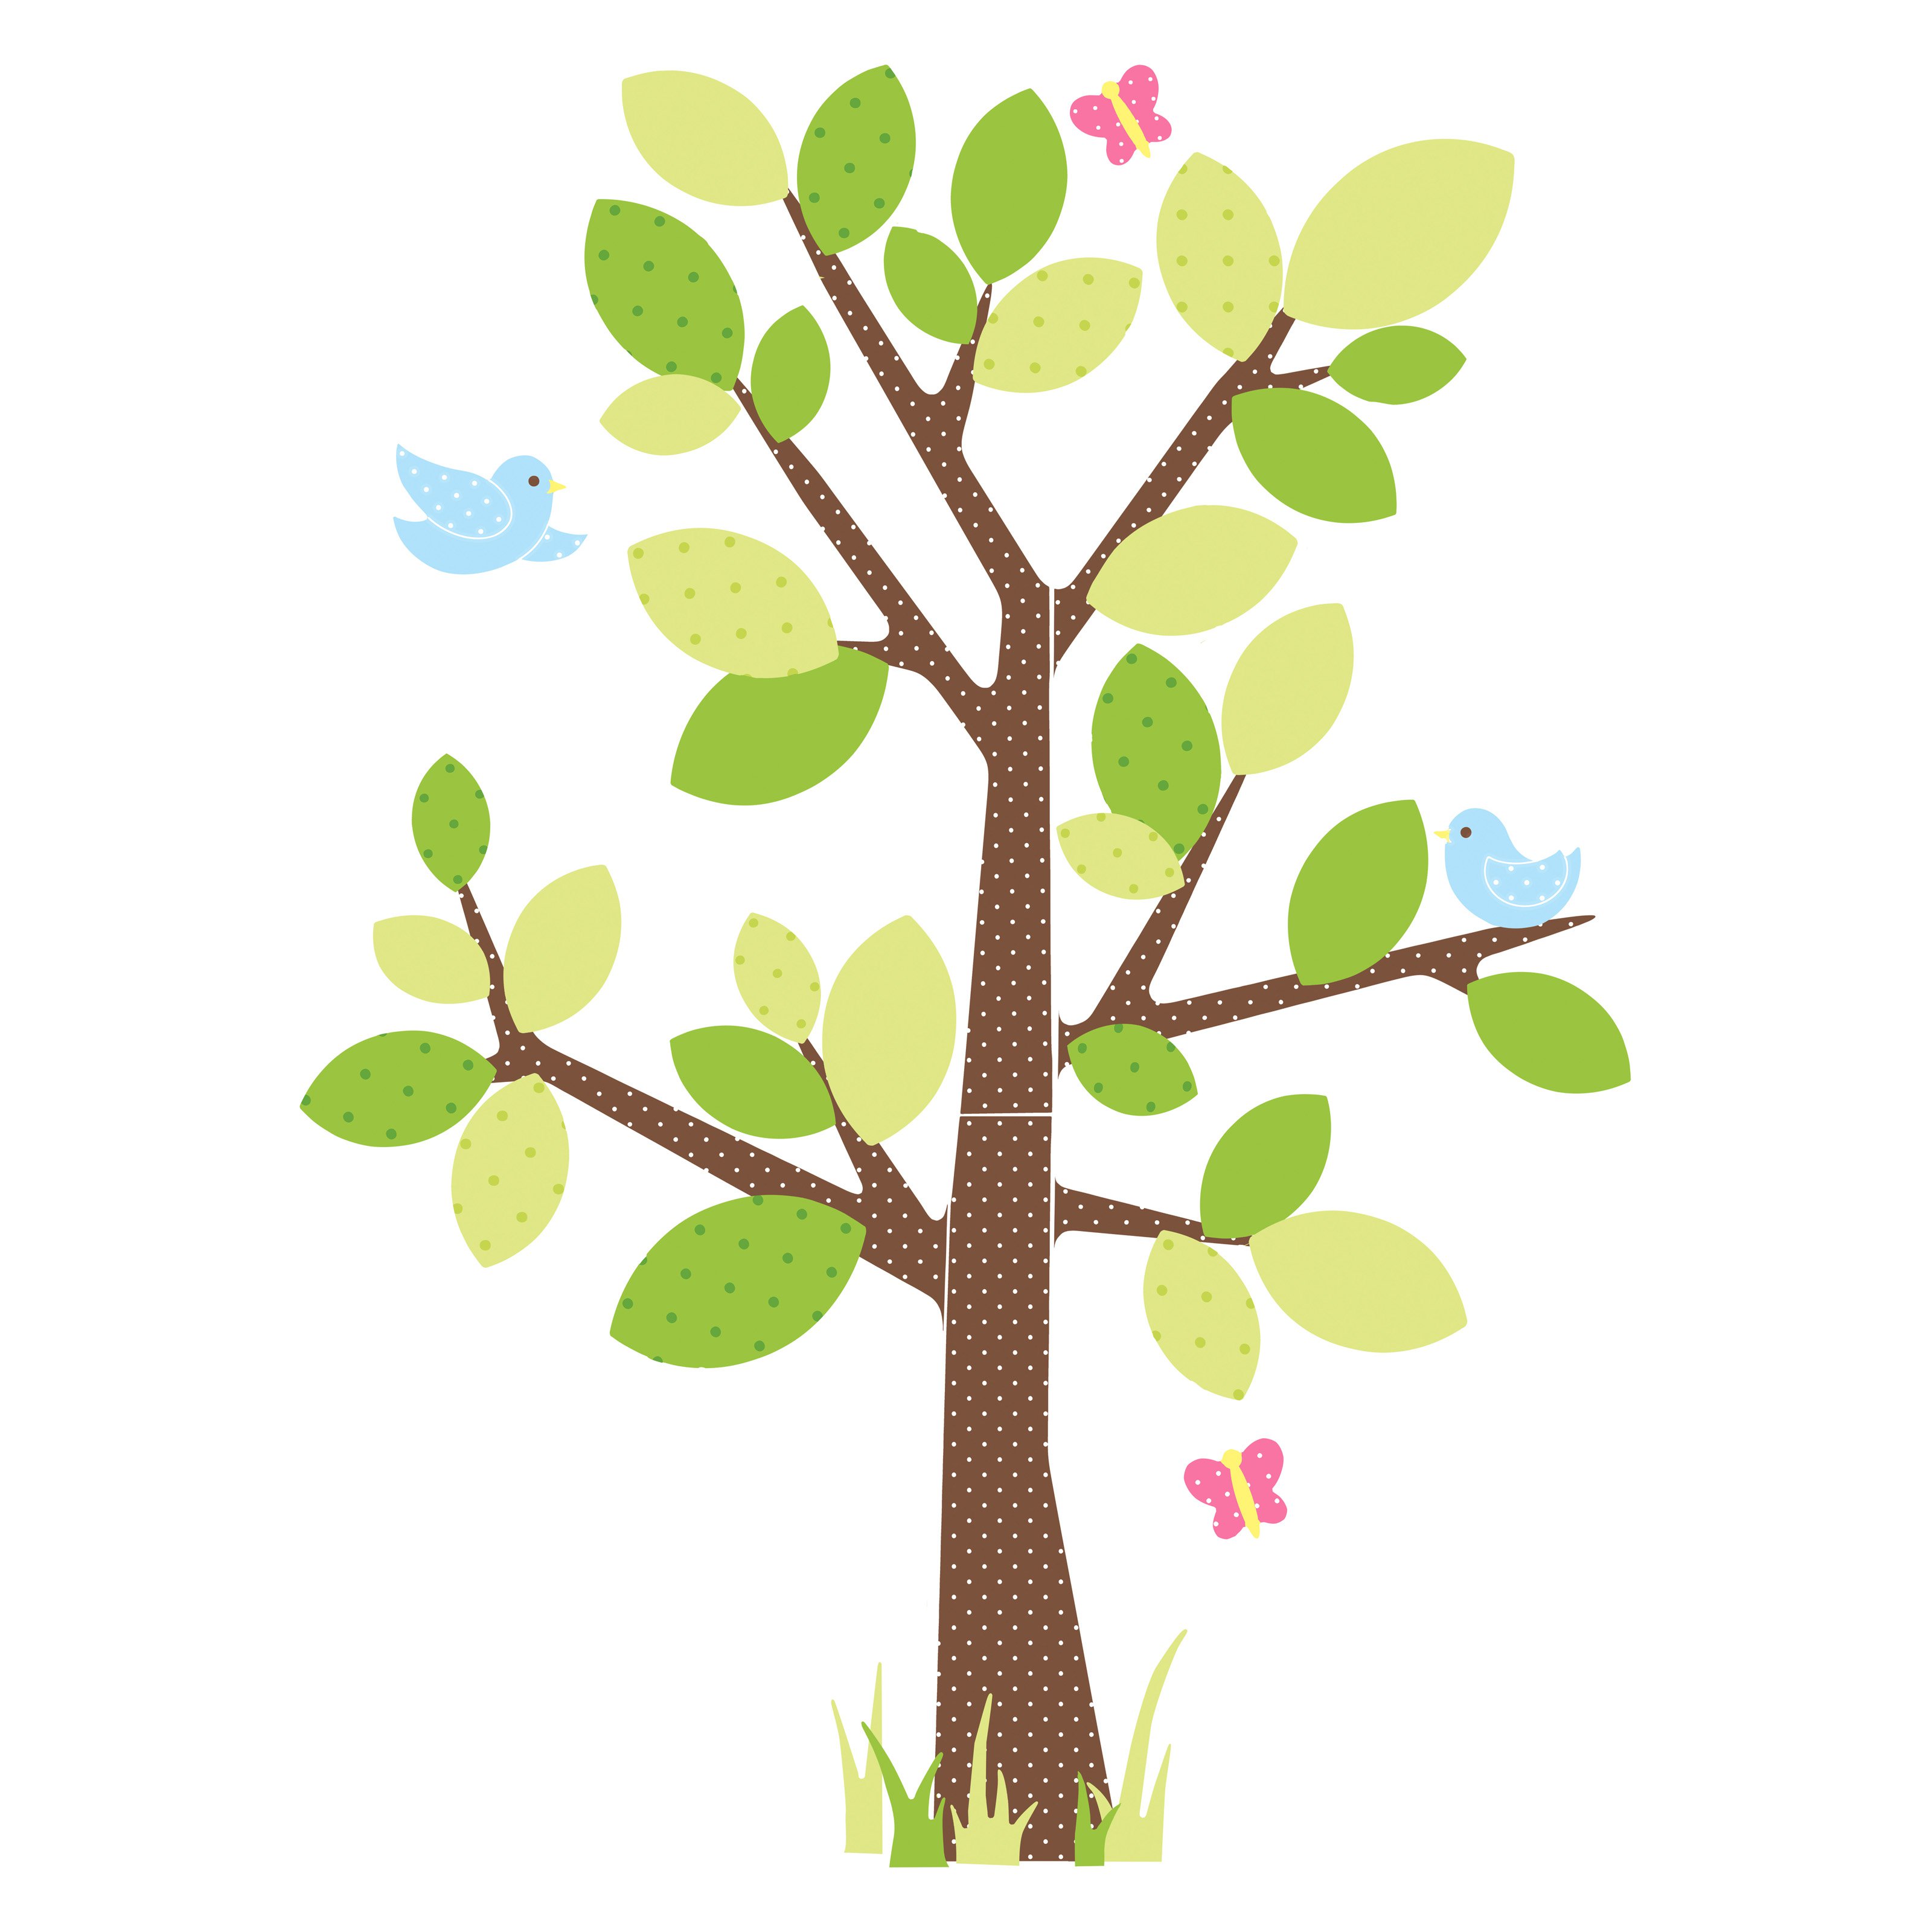 Images For > Cartoon Tree With Branches No Leaves